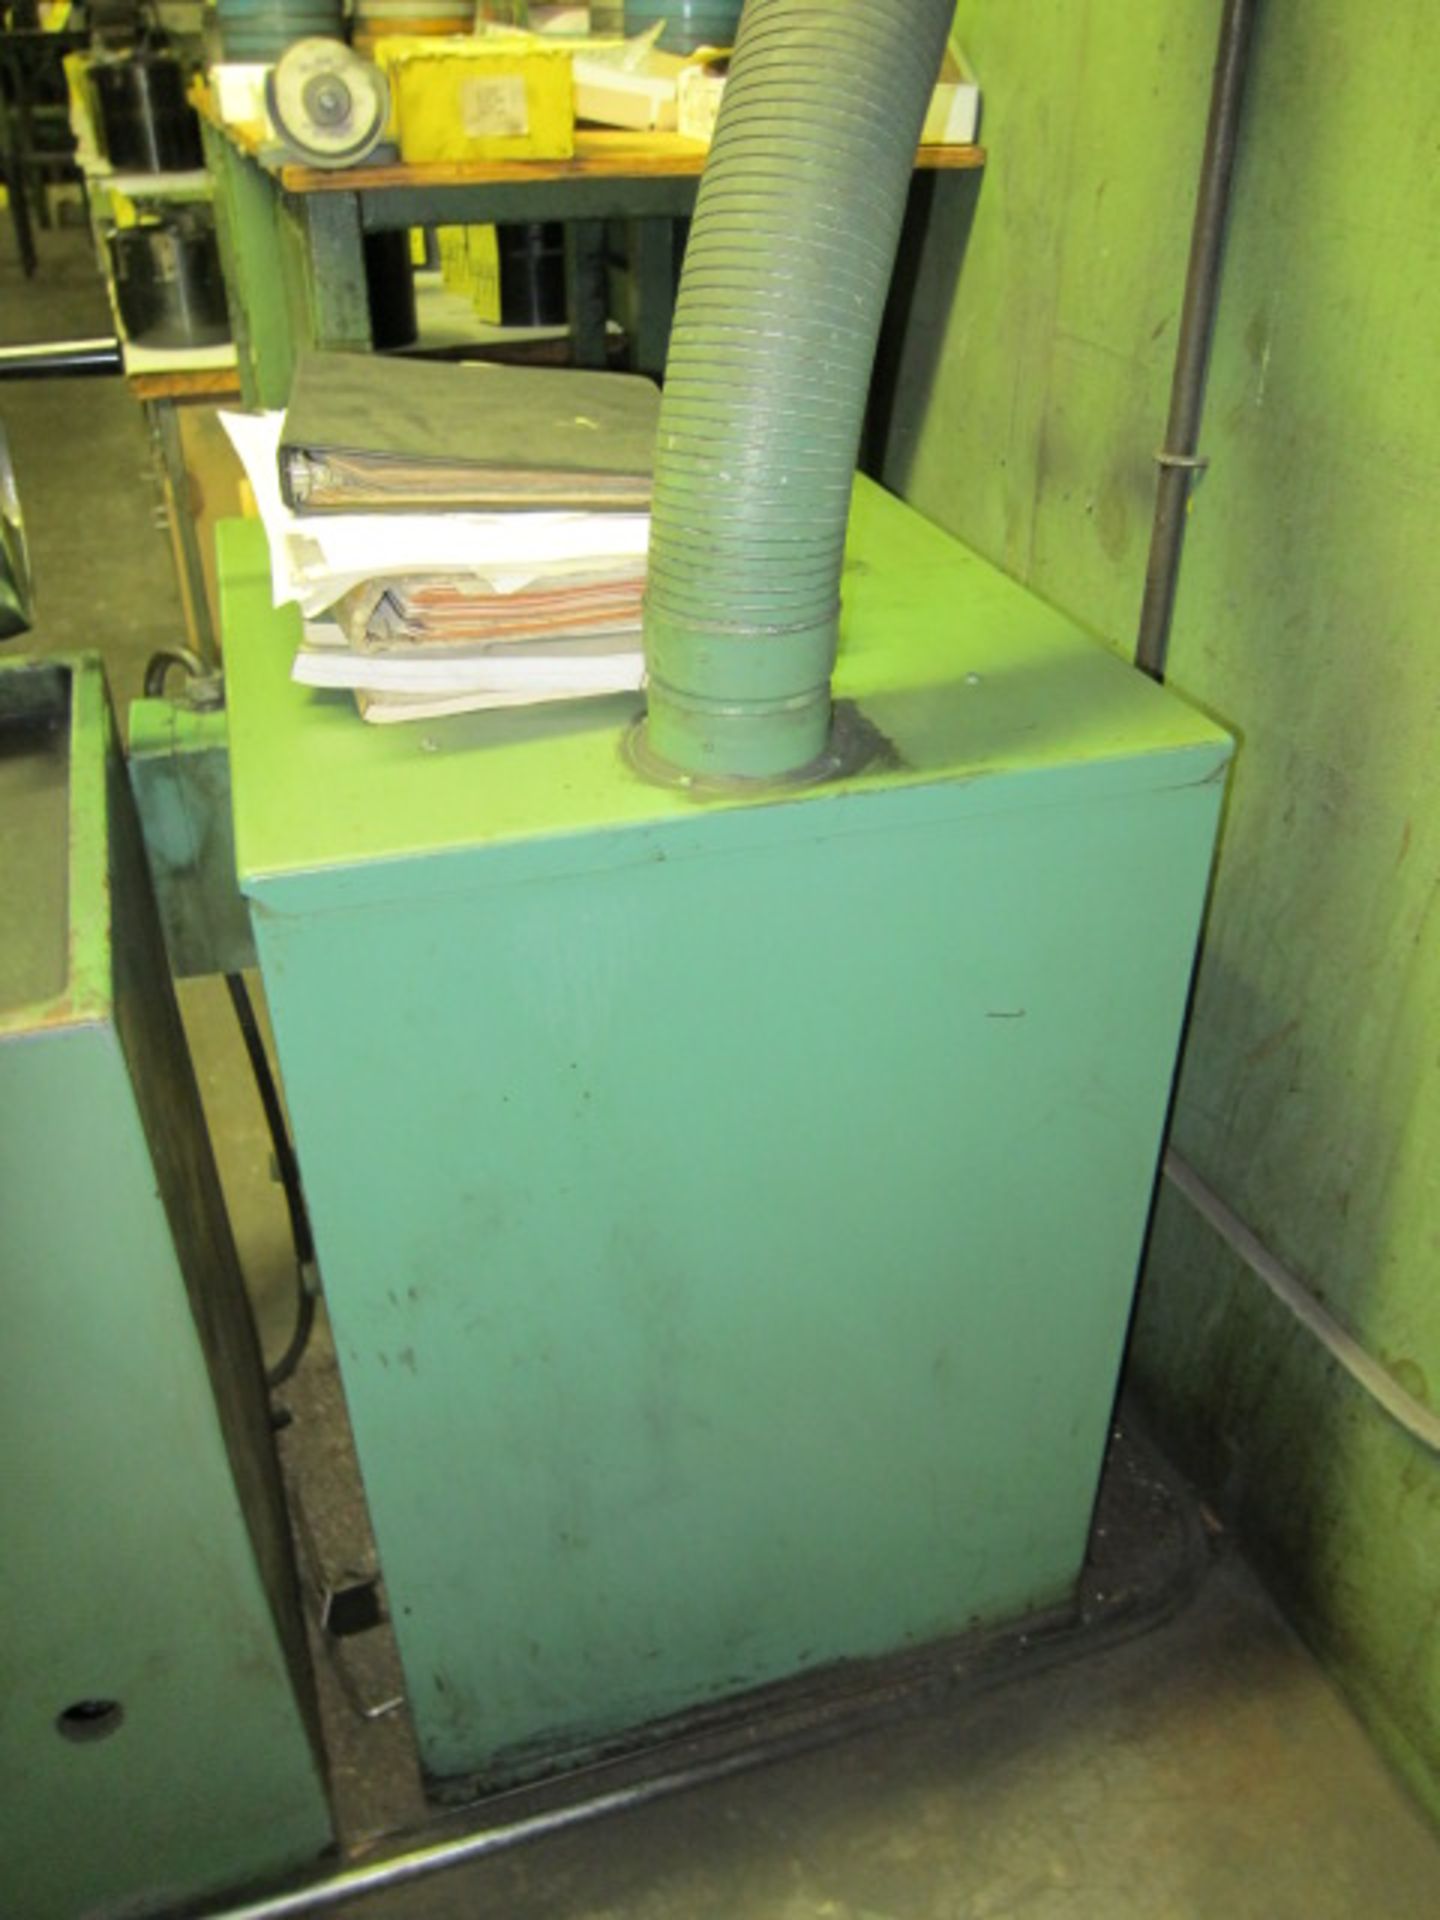 TOOL & CUTTER GRINDER, CINCINNATI NO. 2, 6” x 35-½” pwr. feed swivel table, Torit dust collector, - Image 6 of 10